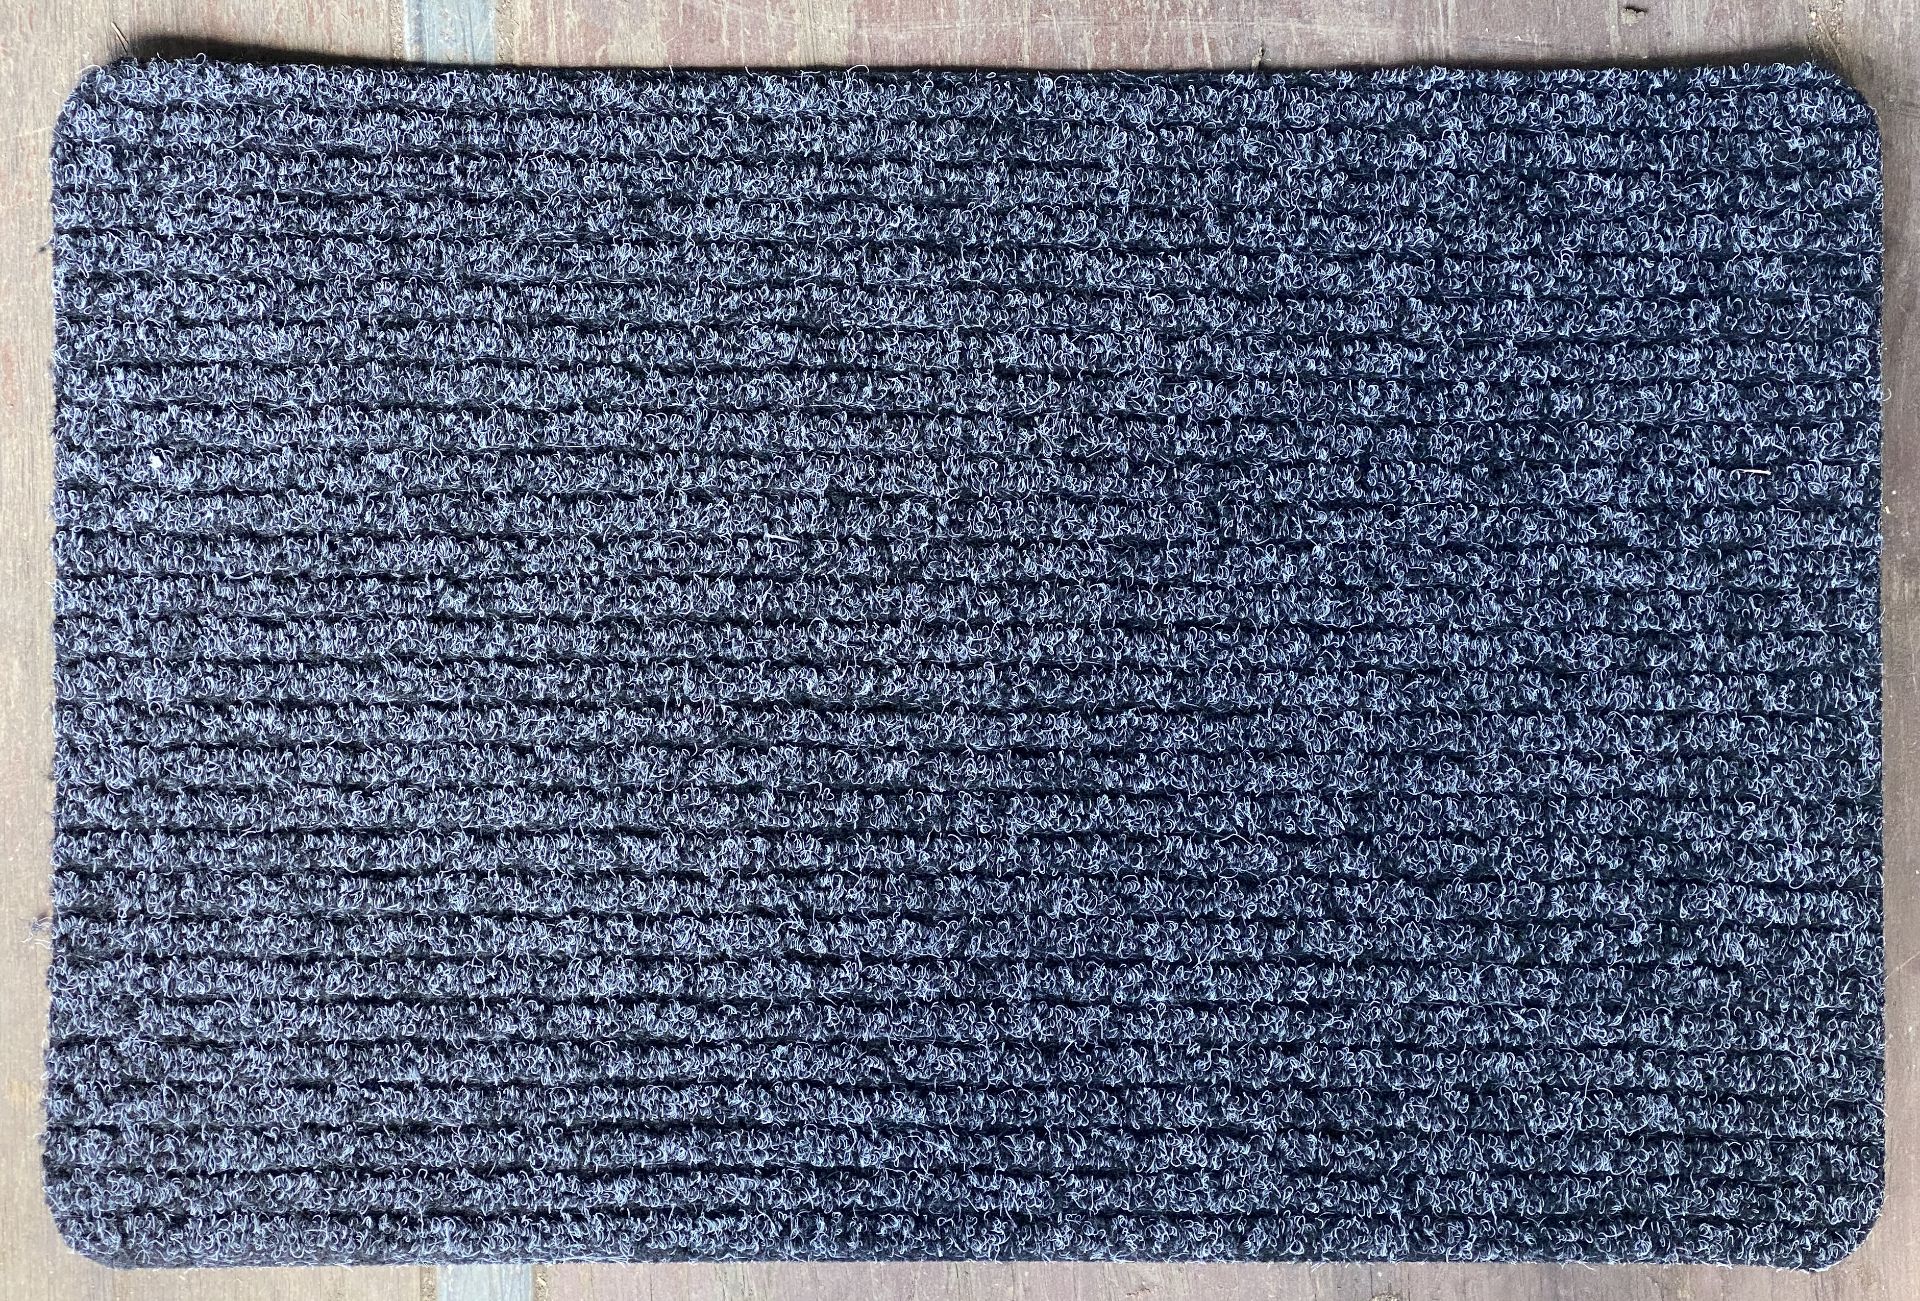 Approximately 800 x Indoor Ribbed Scraper Mats - 40cm x 60cm - Contents to pallet. Cont.